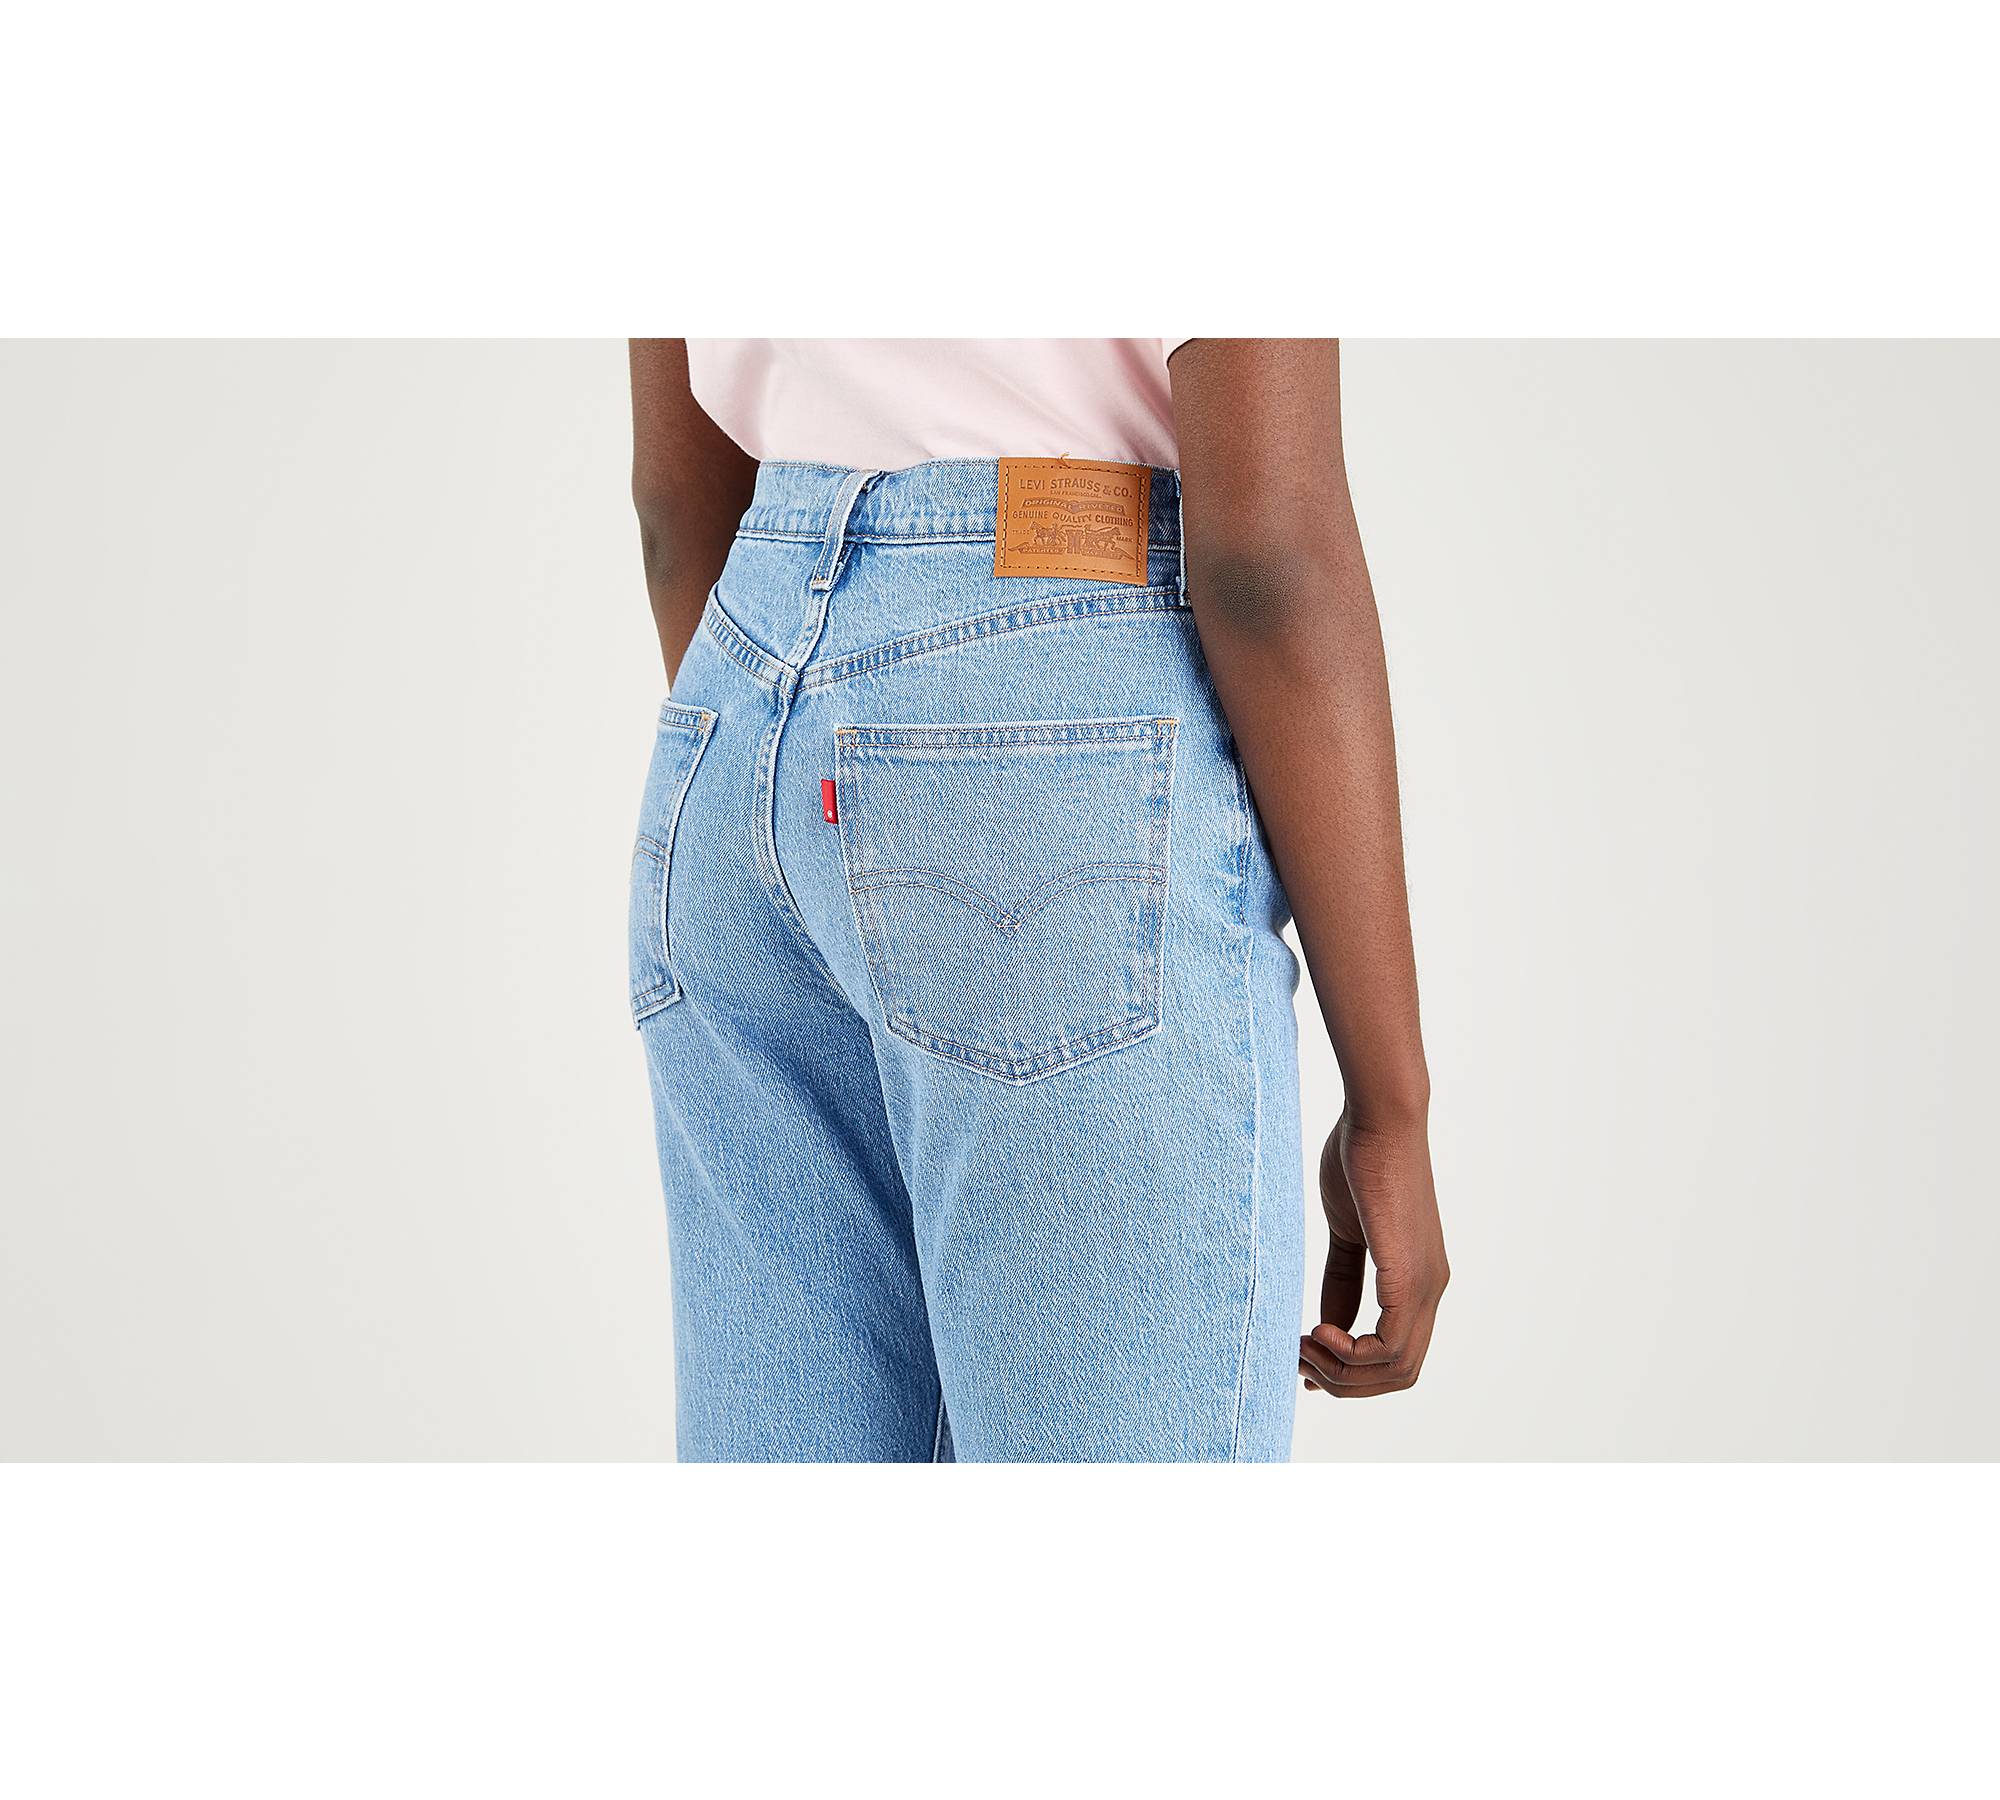 Levi's High Waisted Mom Jeans in Winter Cloud Dark Wash Size 31